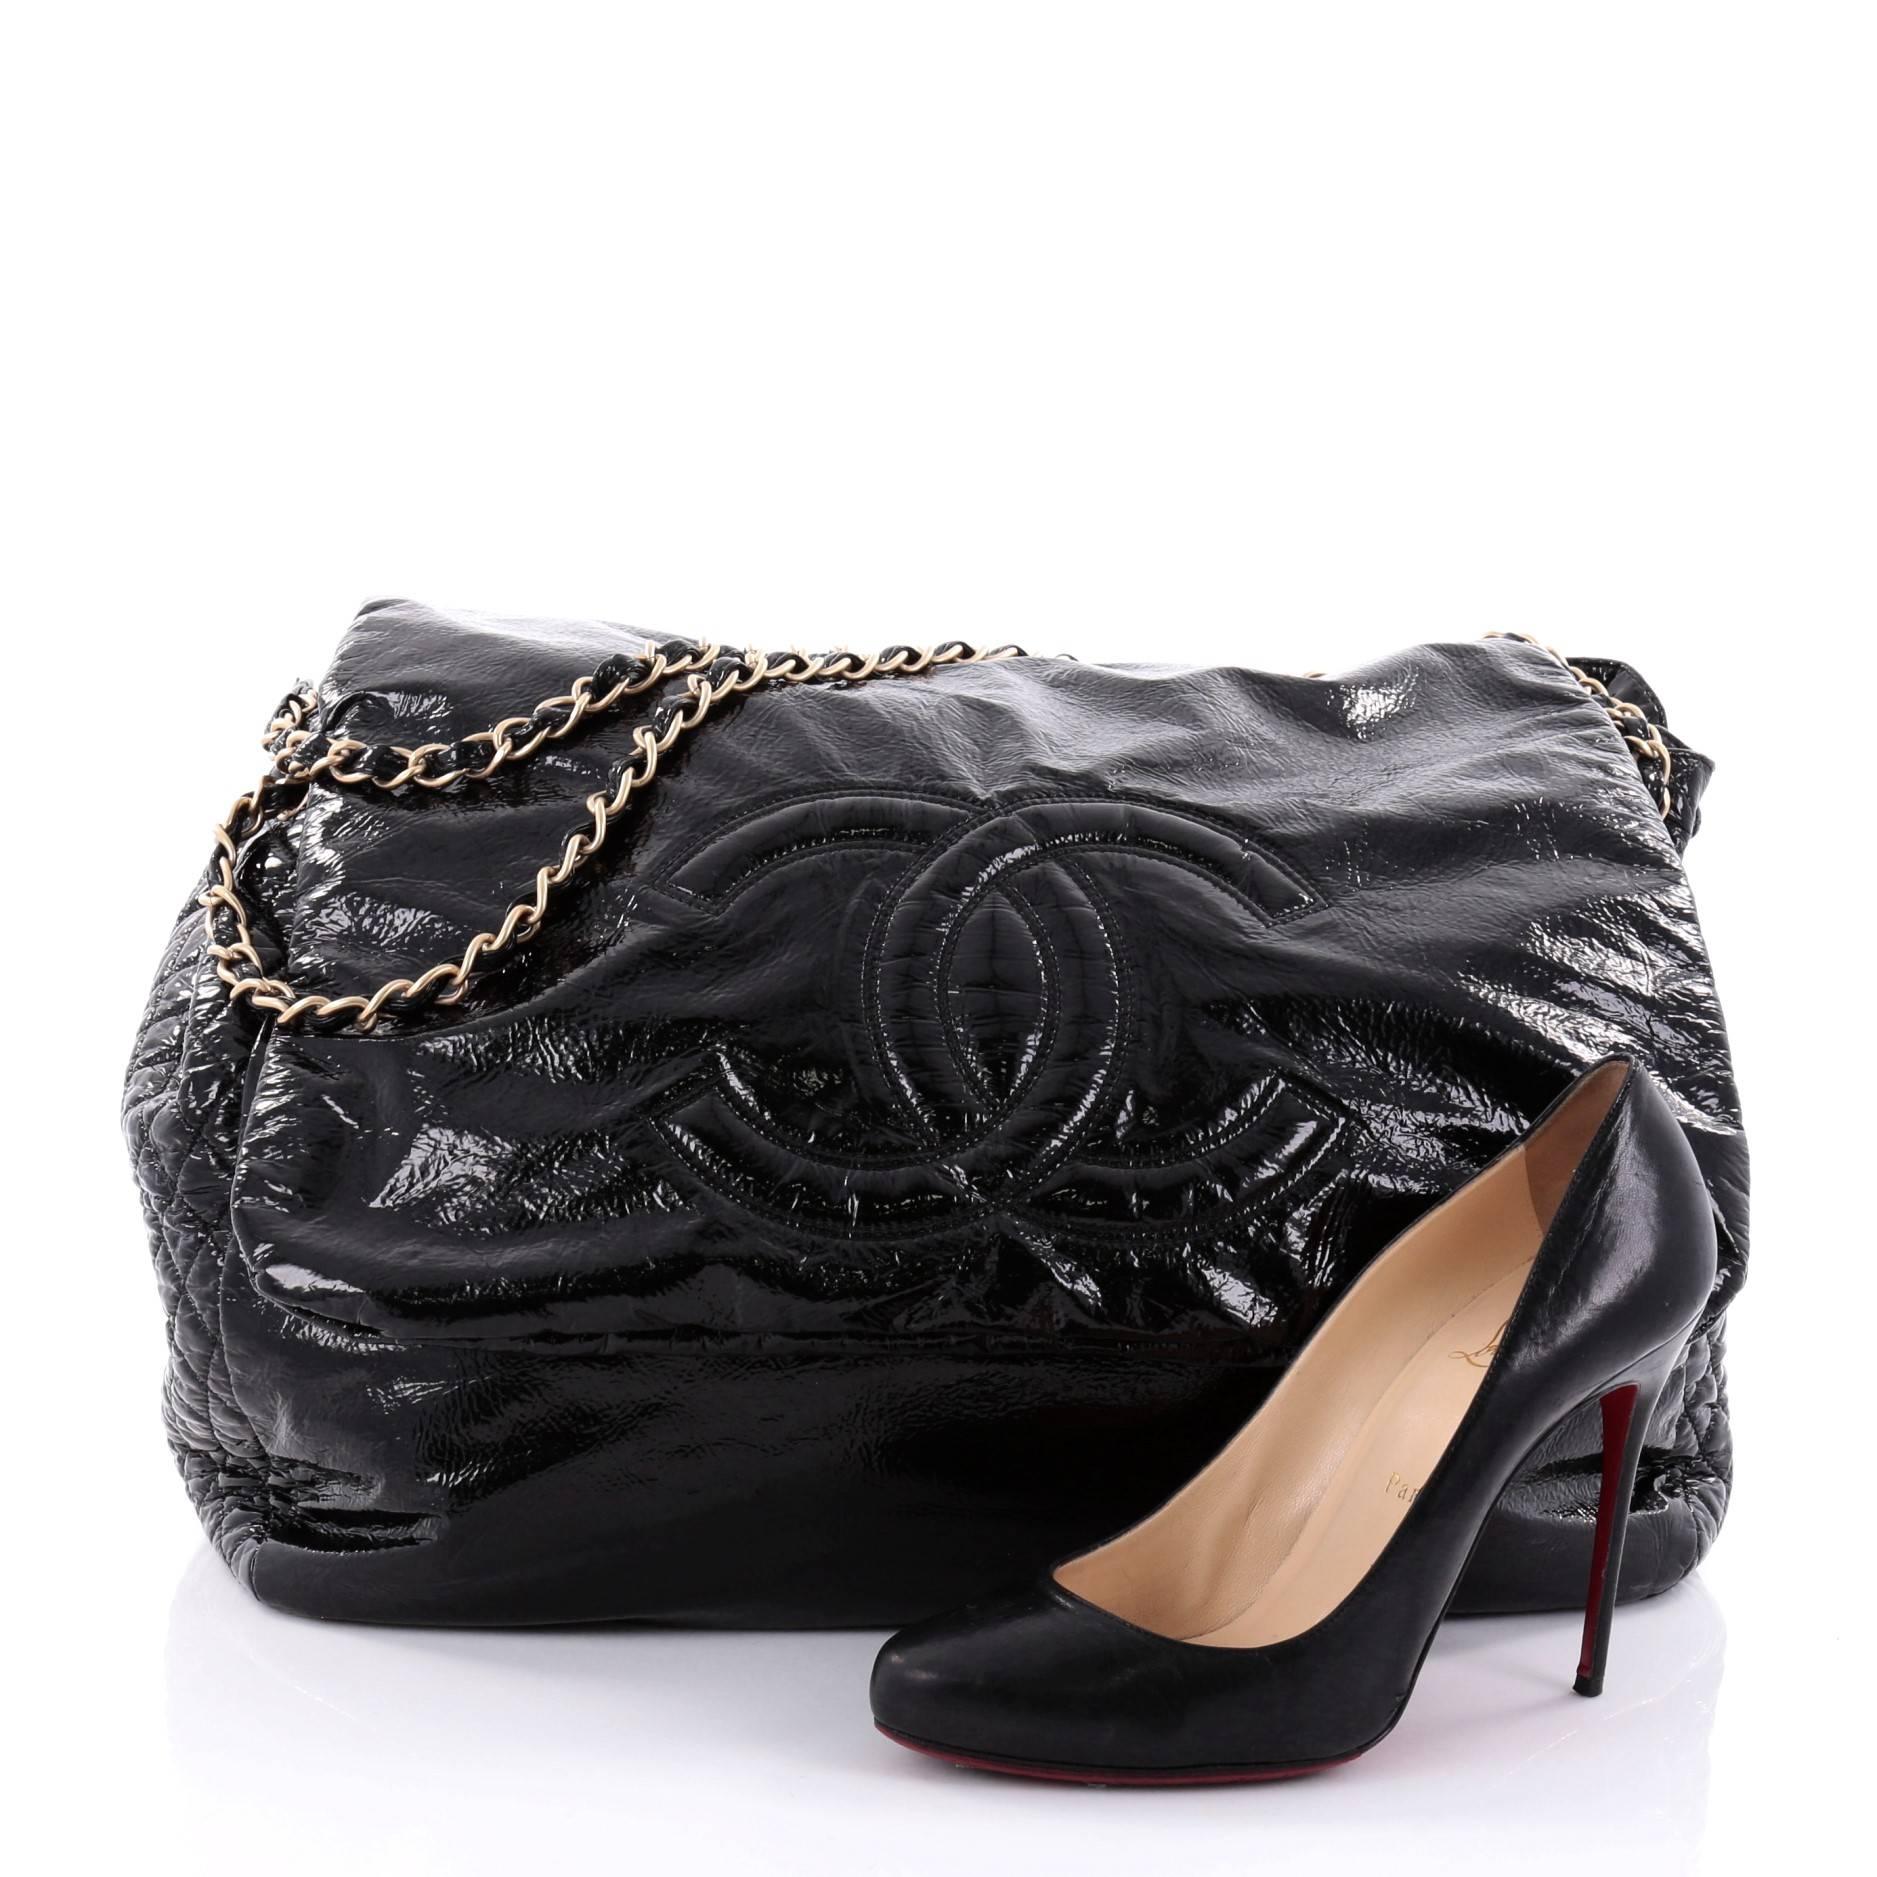 This authentic Chanel Rock and Chain Flap Bag Patent XL boasts an oversized stature perfect for Chanel lovers. Crafted in black patent leather, this maxi-sized tote features signature woven-in leather chain straps, large CC stitched design on its